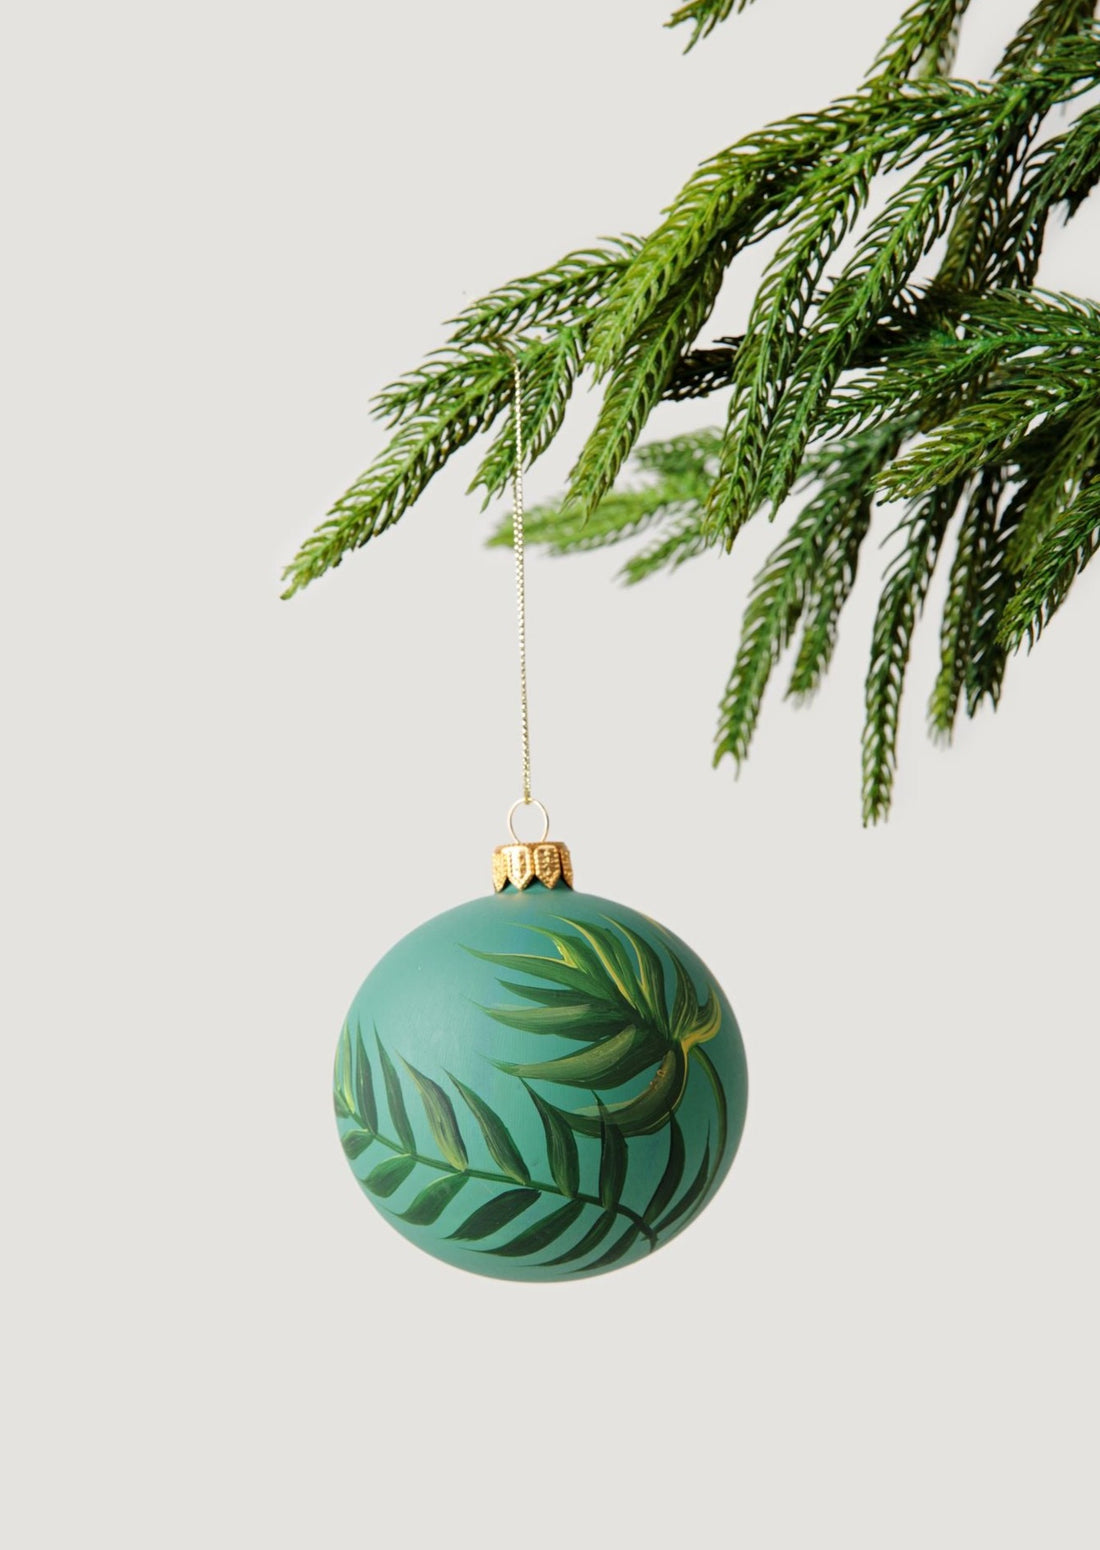 Green Palm Leaf Glass Christmas Ornament Shown on Faux Pine Tree Branch